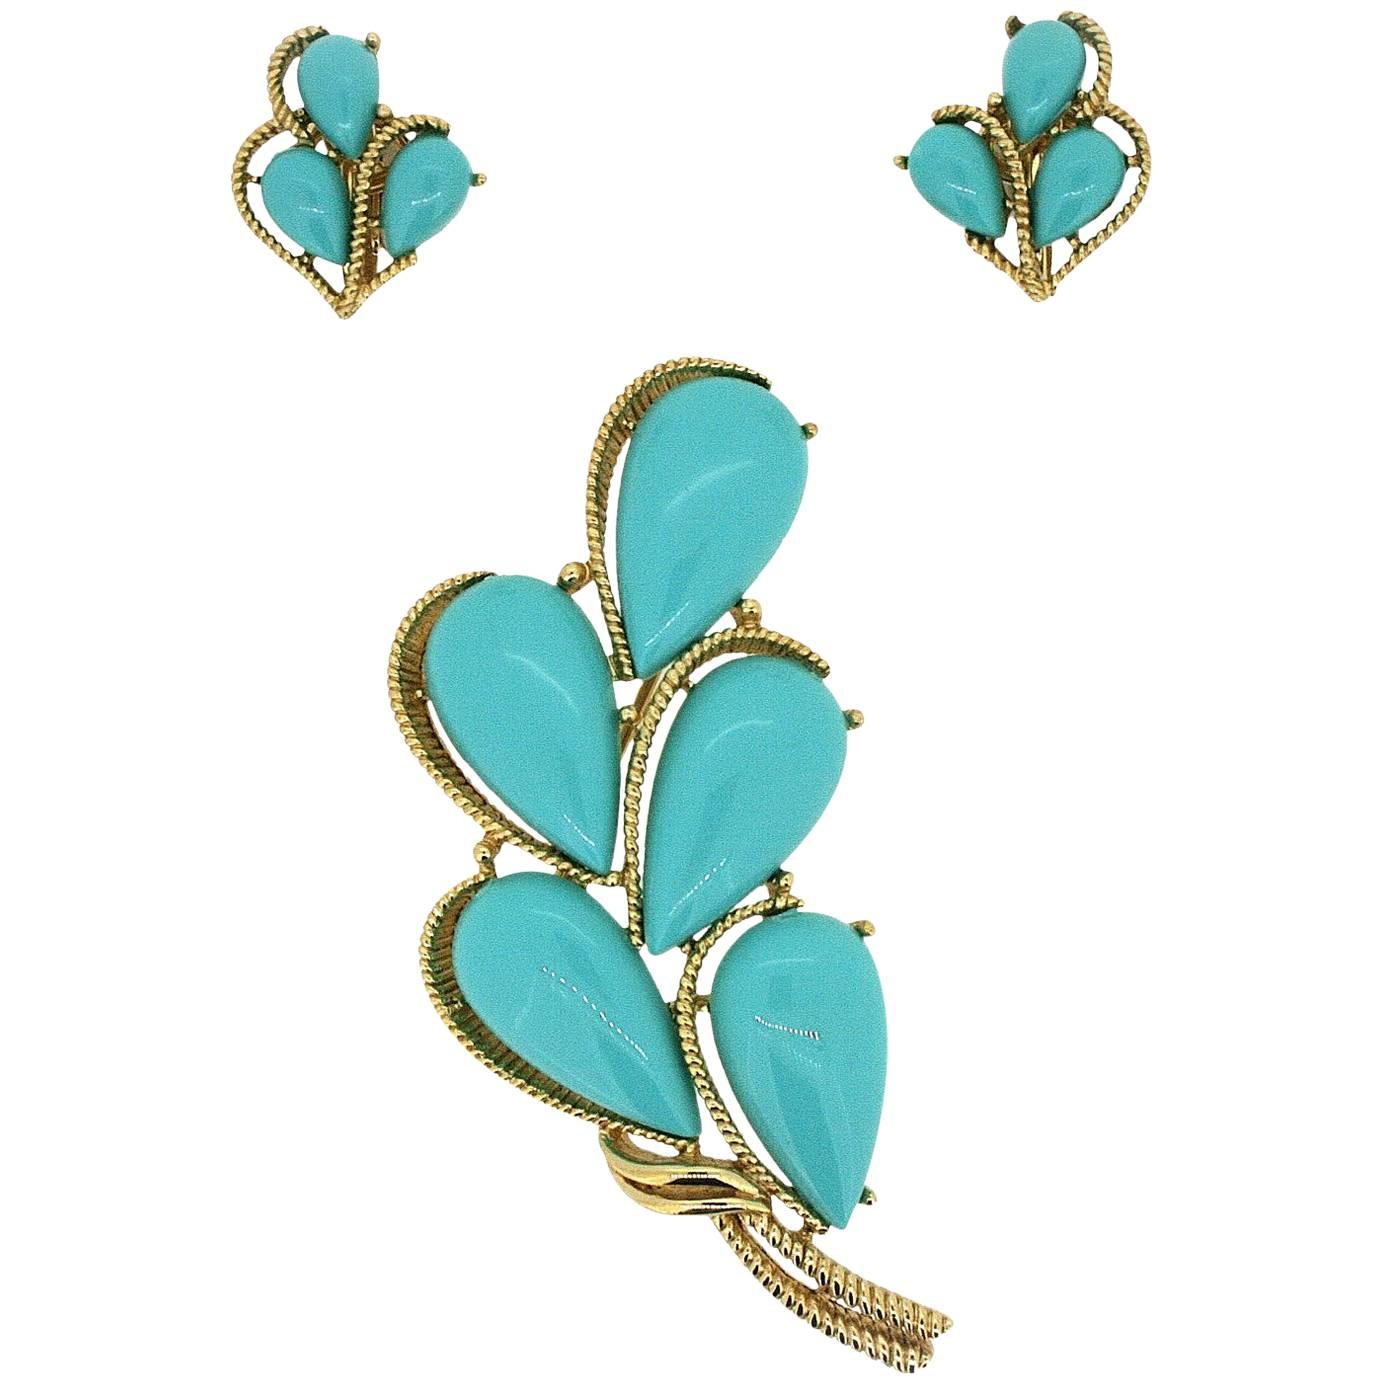 Trifari 1960s Turquoise Cabochon Brooch and Earrings Set For Sale